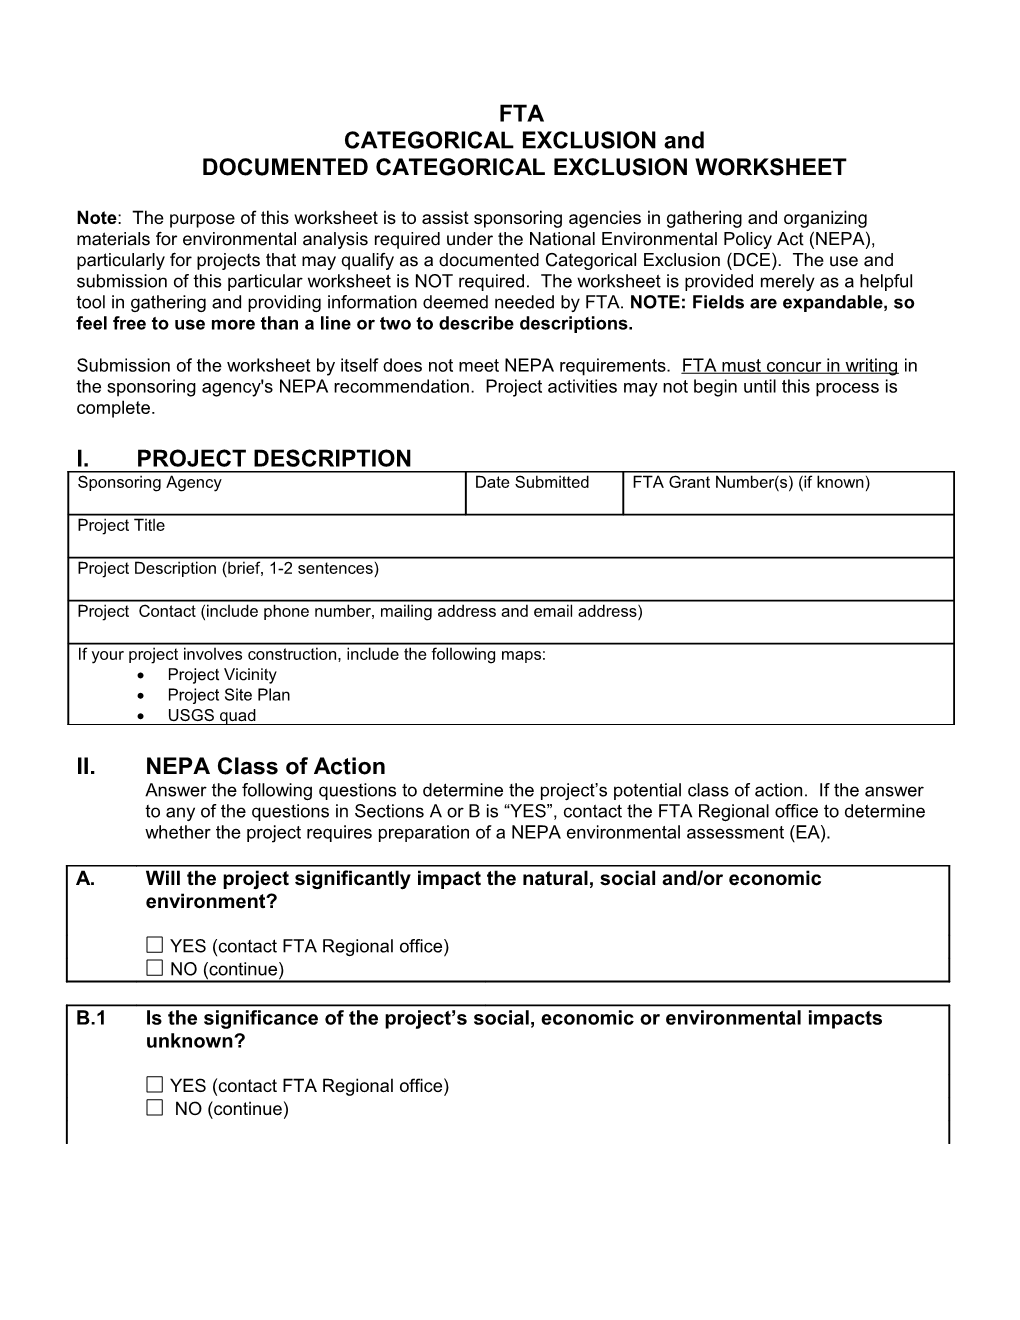 Documented Categorical Exclusion Worksheet